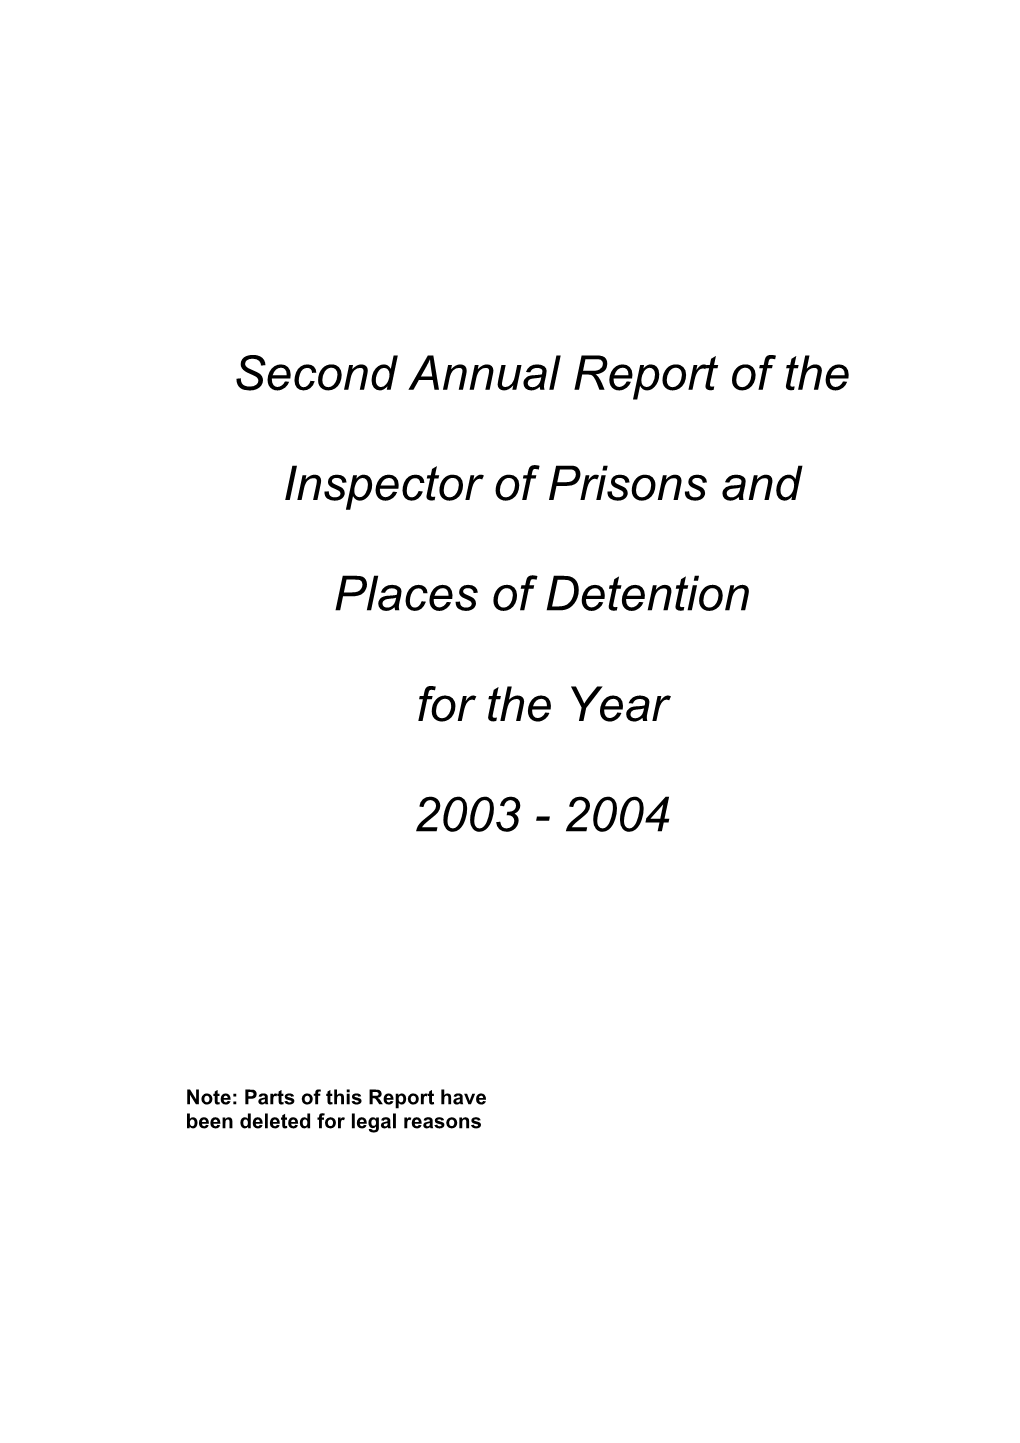 Second Annual Report of the Inspector of Prisons and Places Of